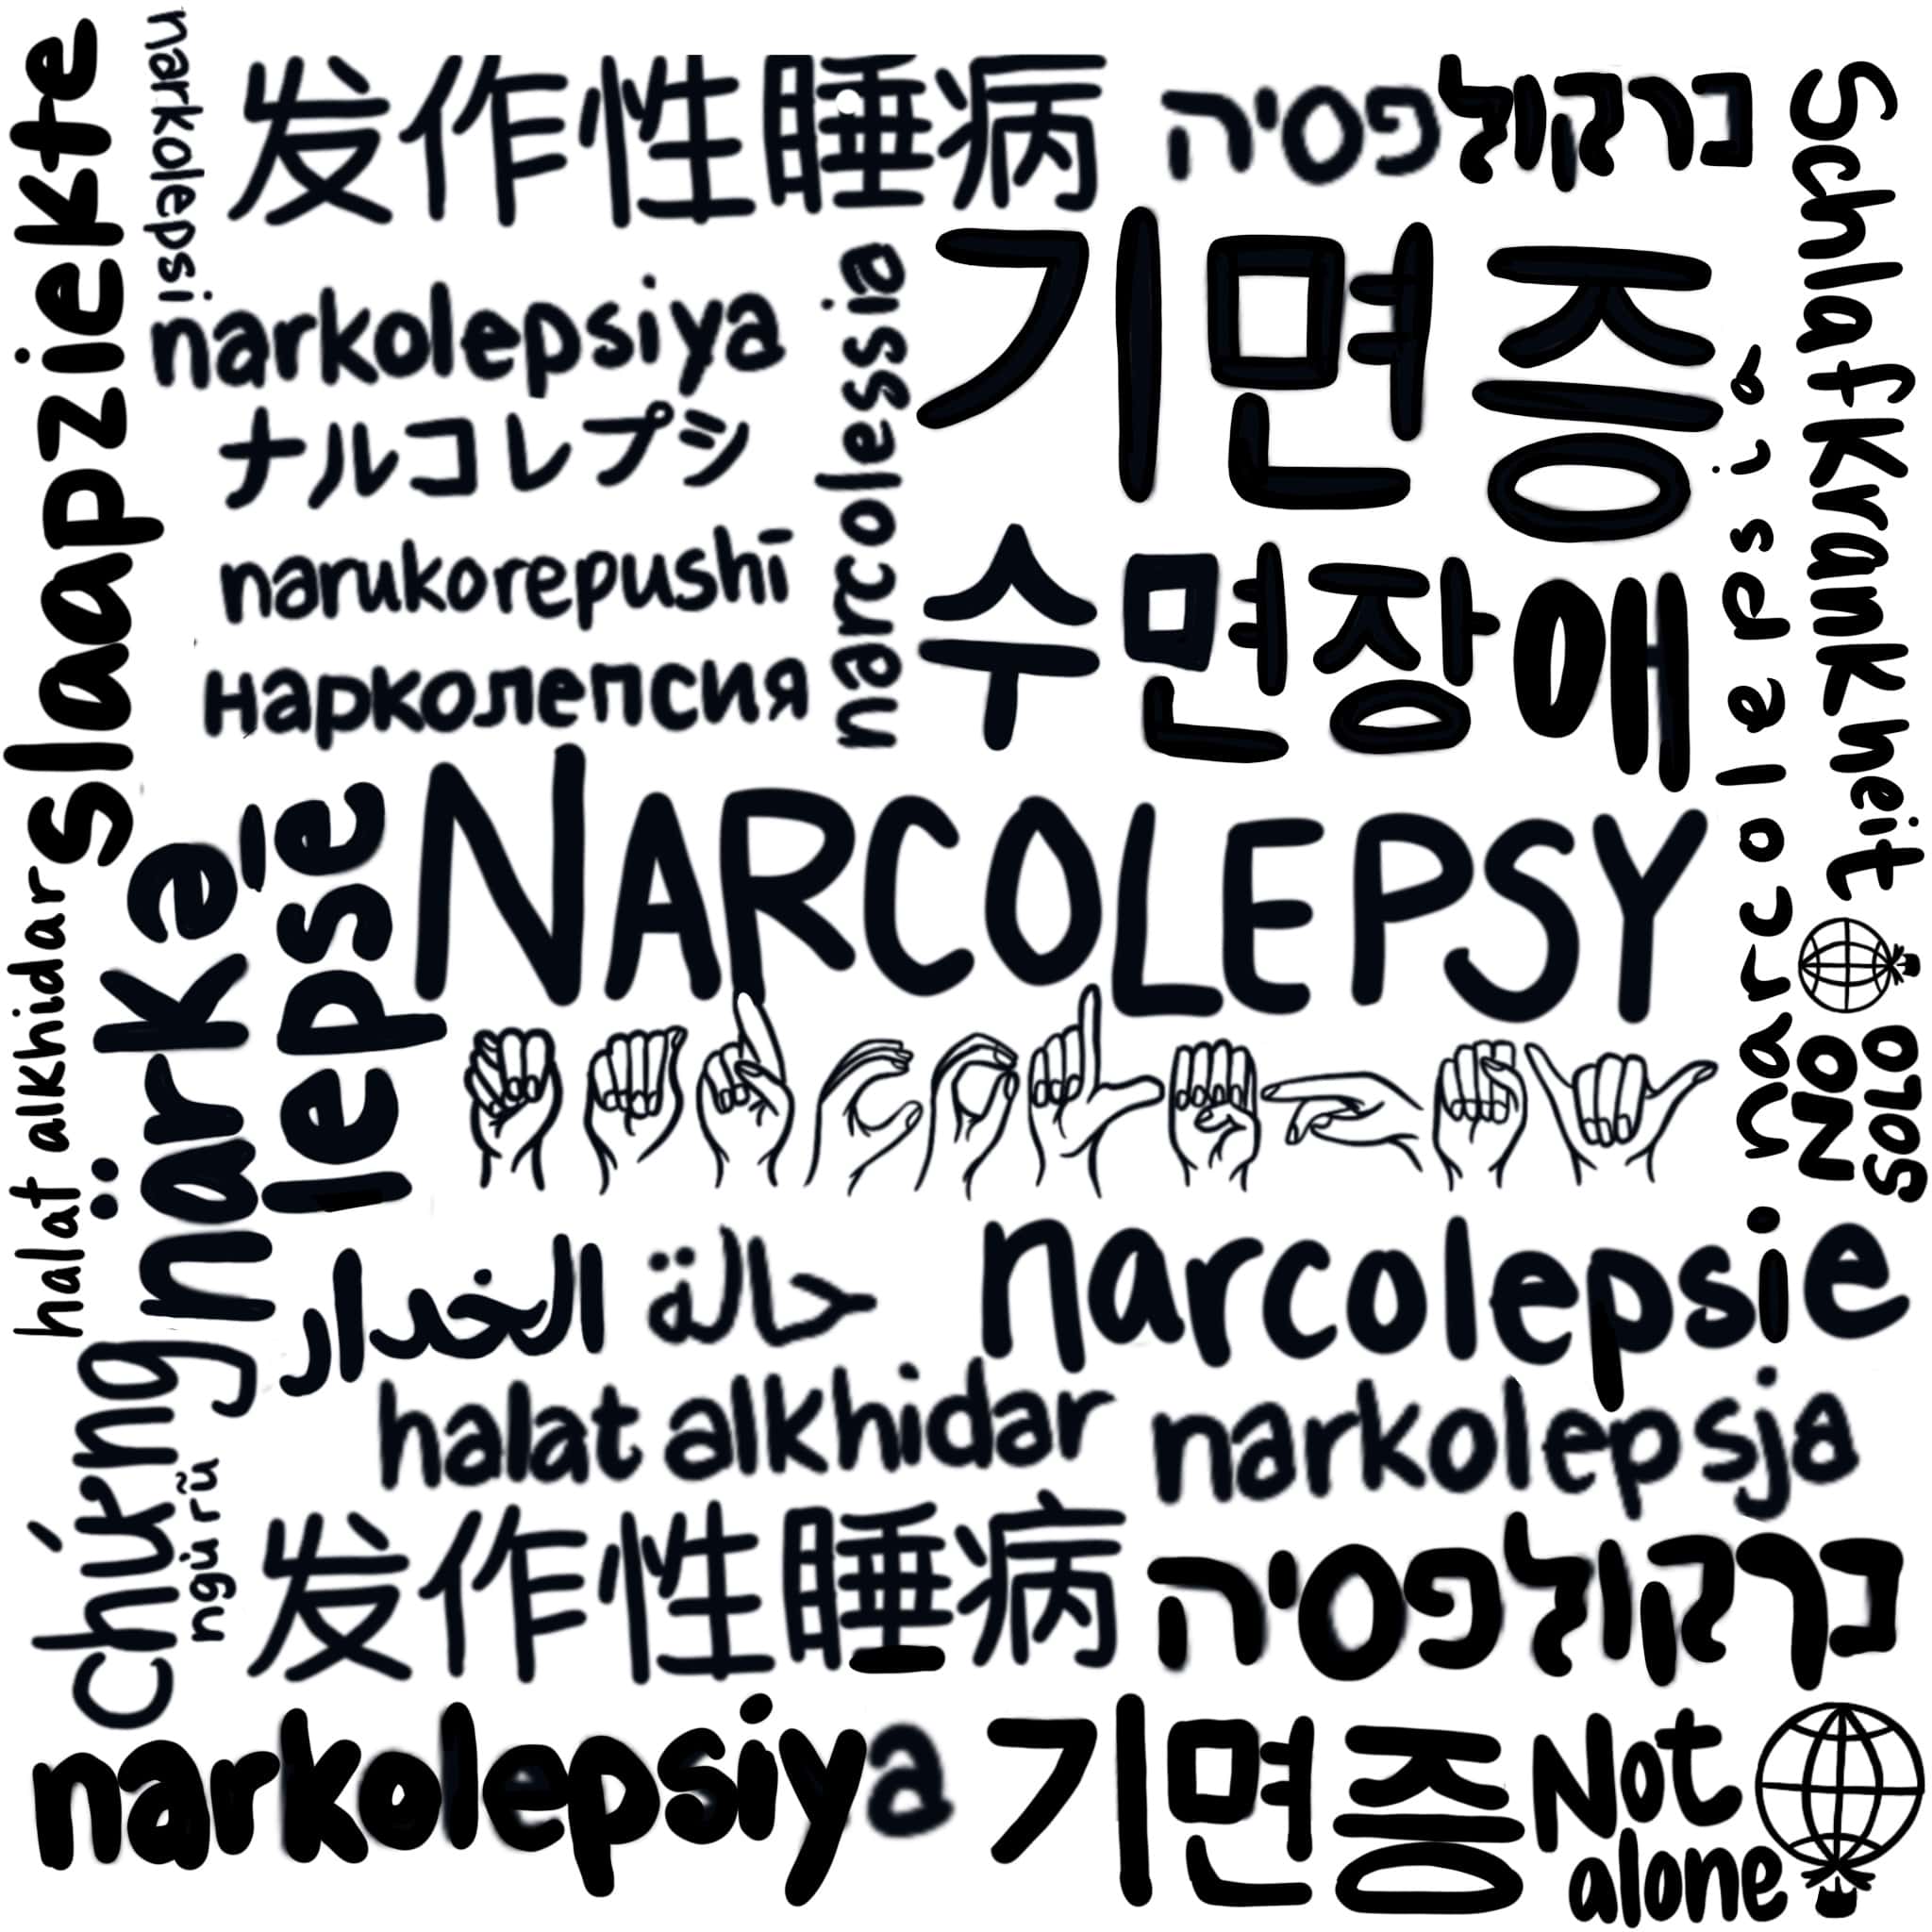 narcolepsy in world languages in white